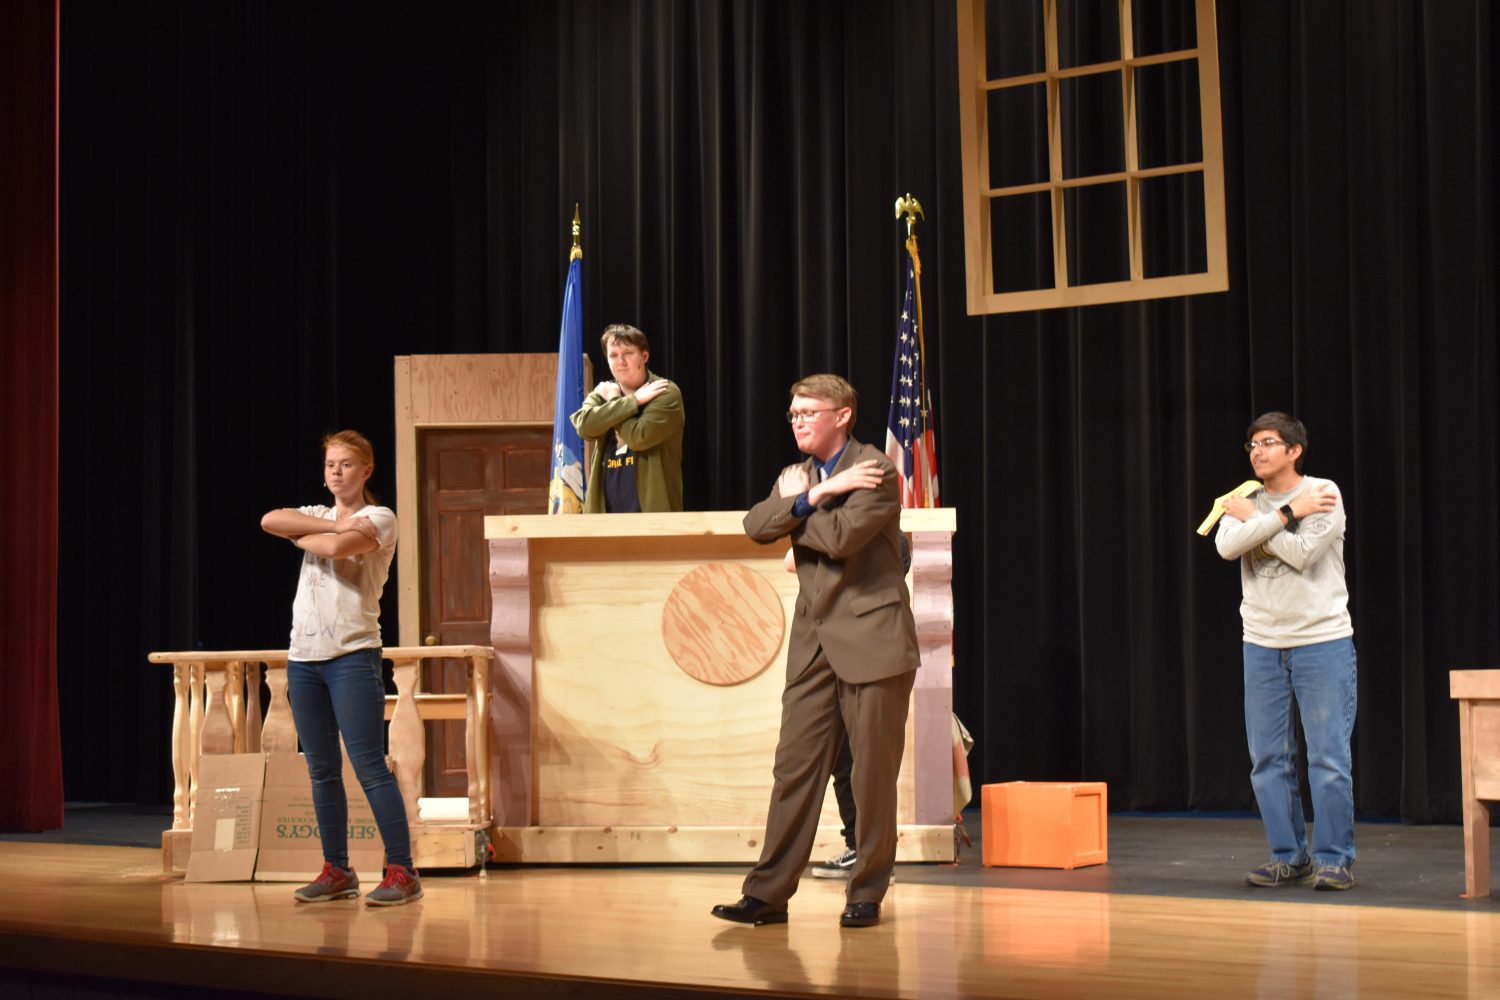 MHS to present: “Disorder in the Court!”